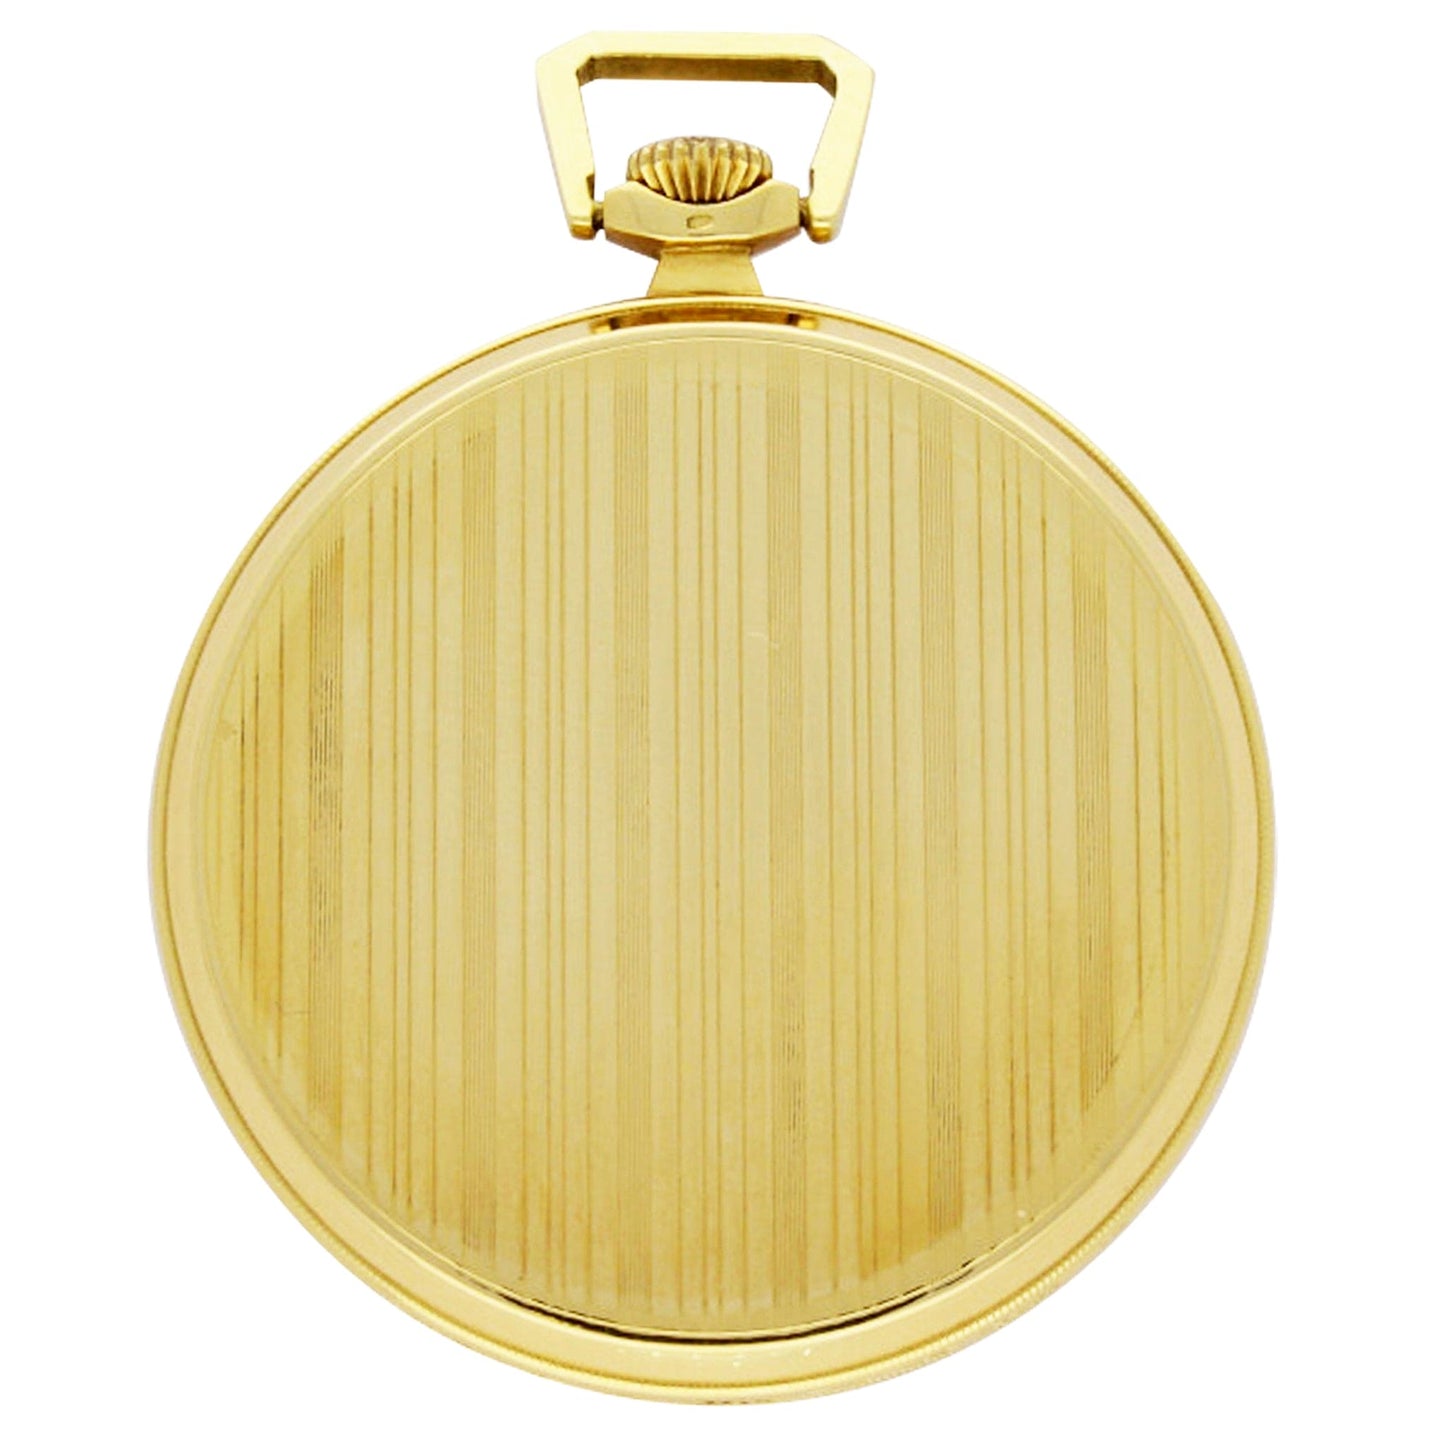 18ct yellow gold OMEGA open face pocket watch. Made 1929